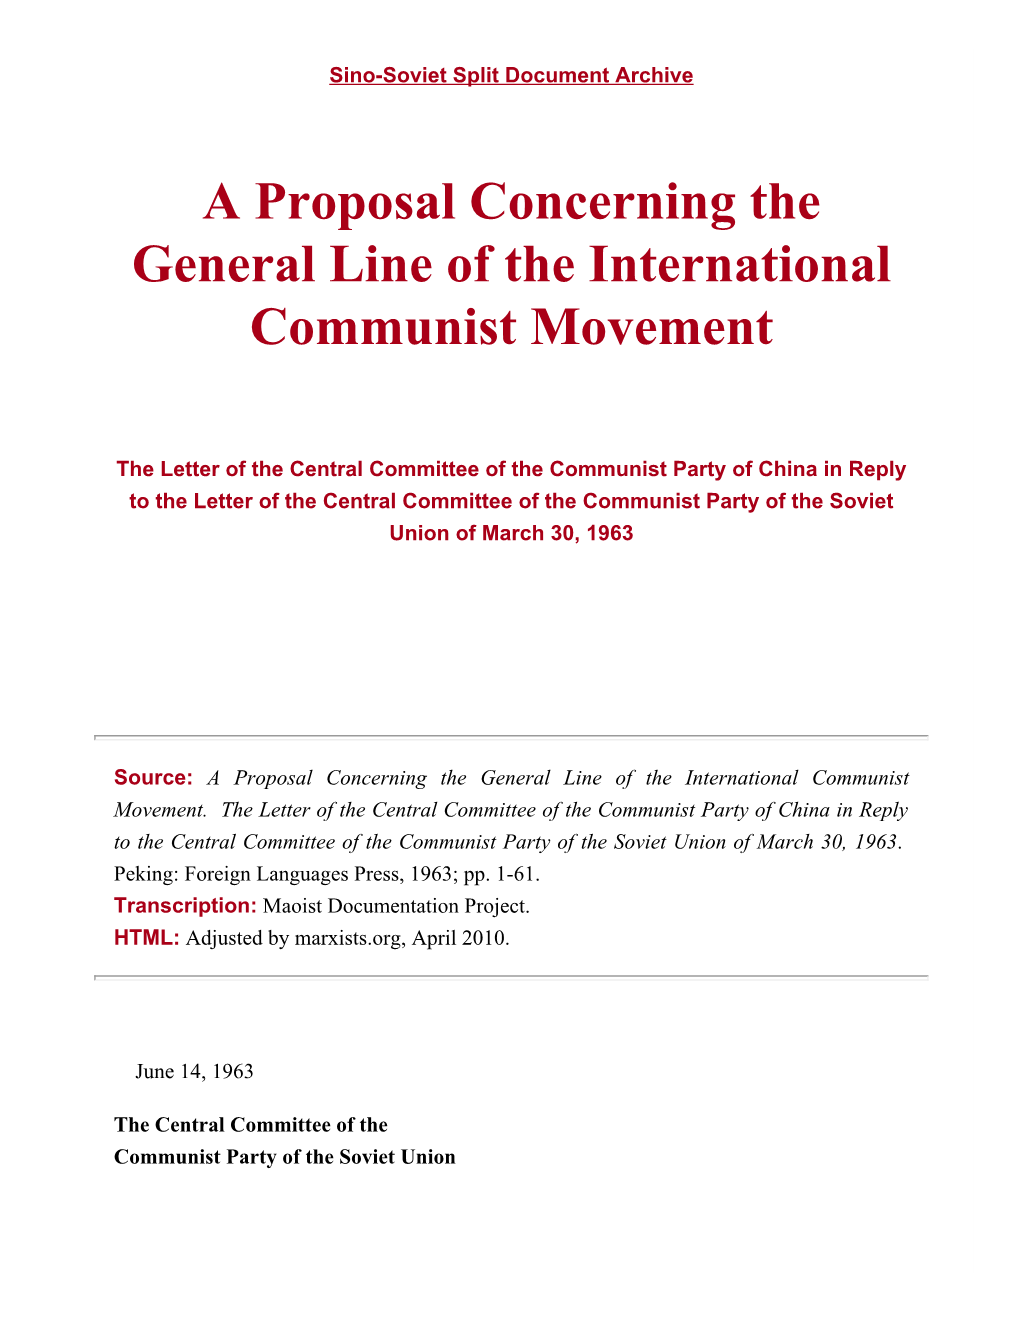 A Proposal Concerning the General Line of the International Communist Movement